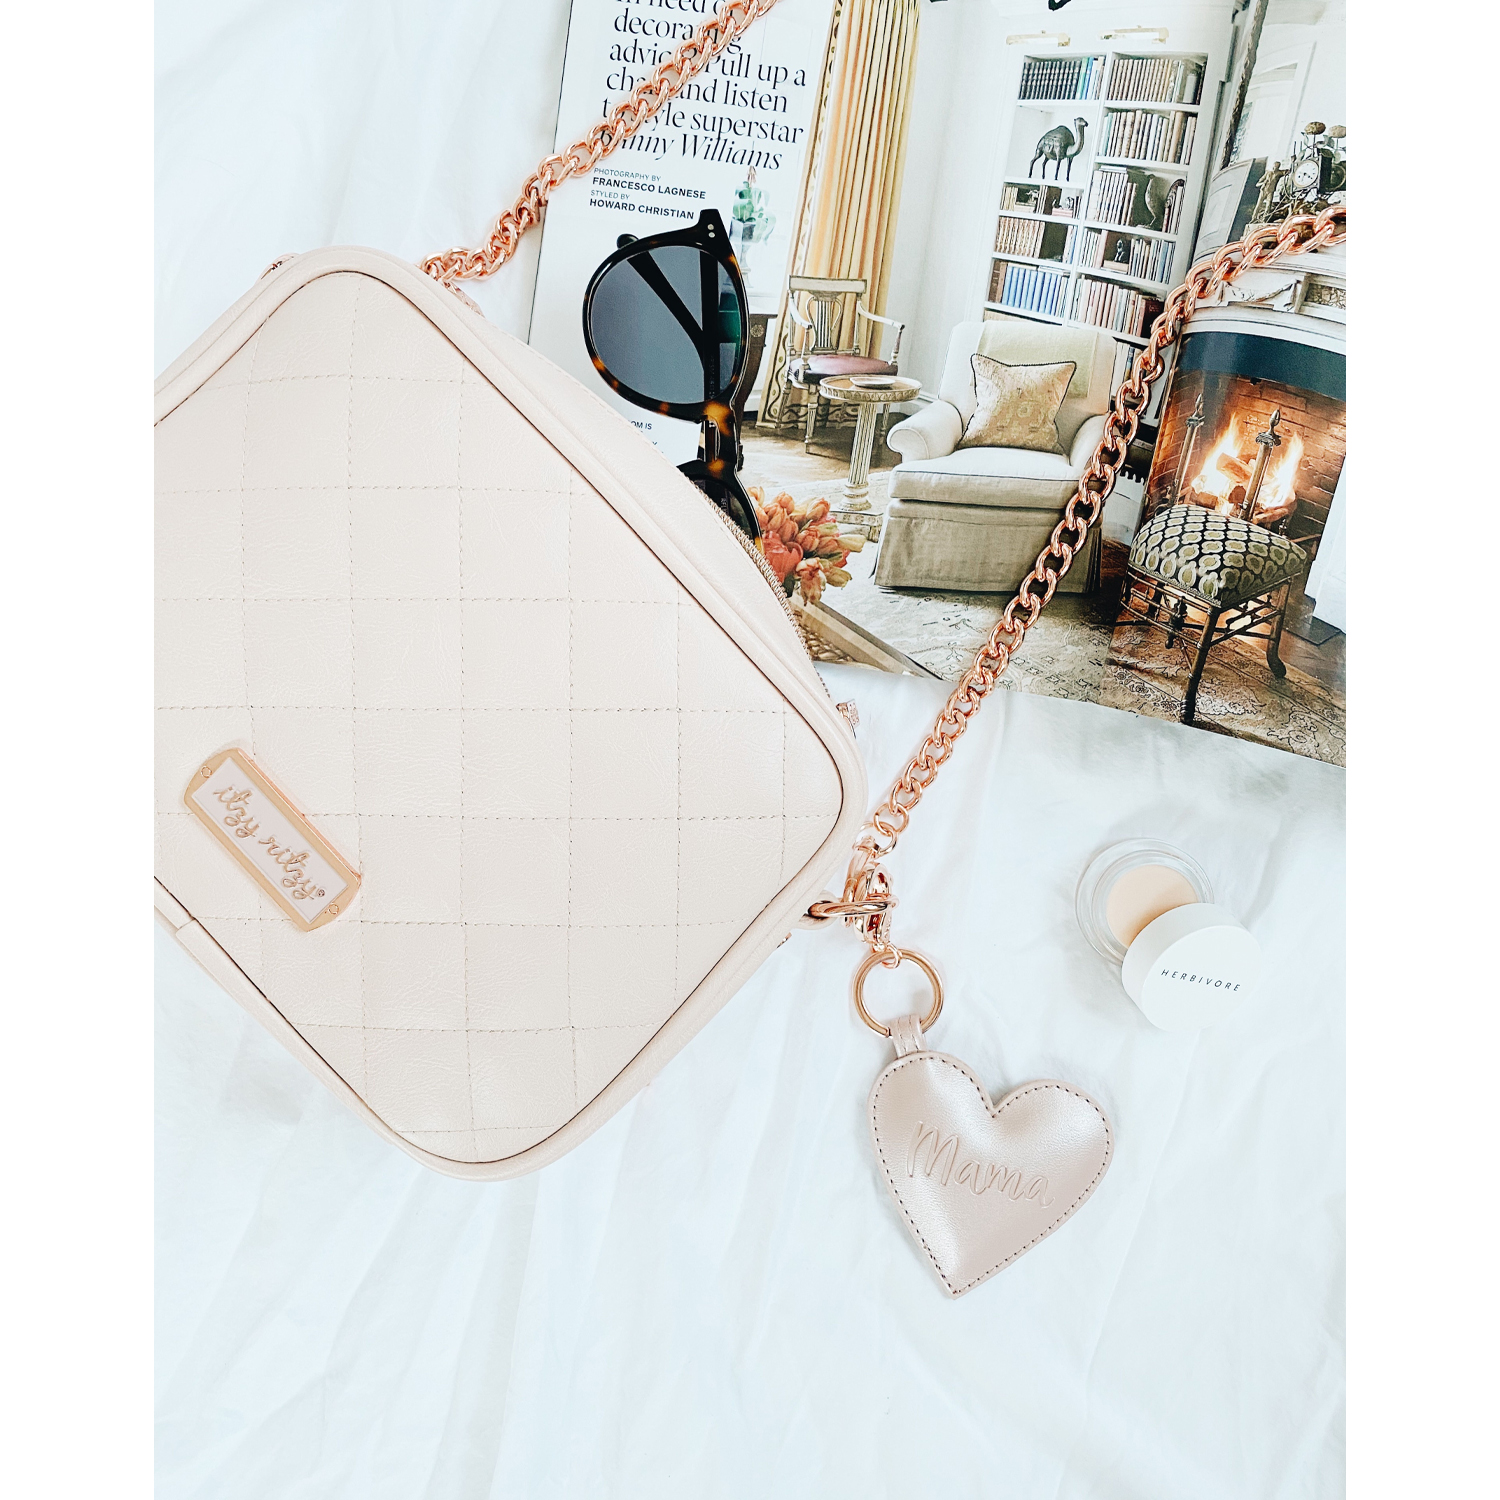 Itzy Ritzy Mama Heart Diaper Bag Charm Keychain - Rose Gold